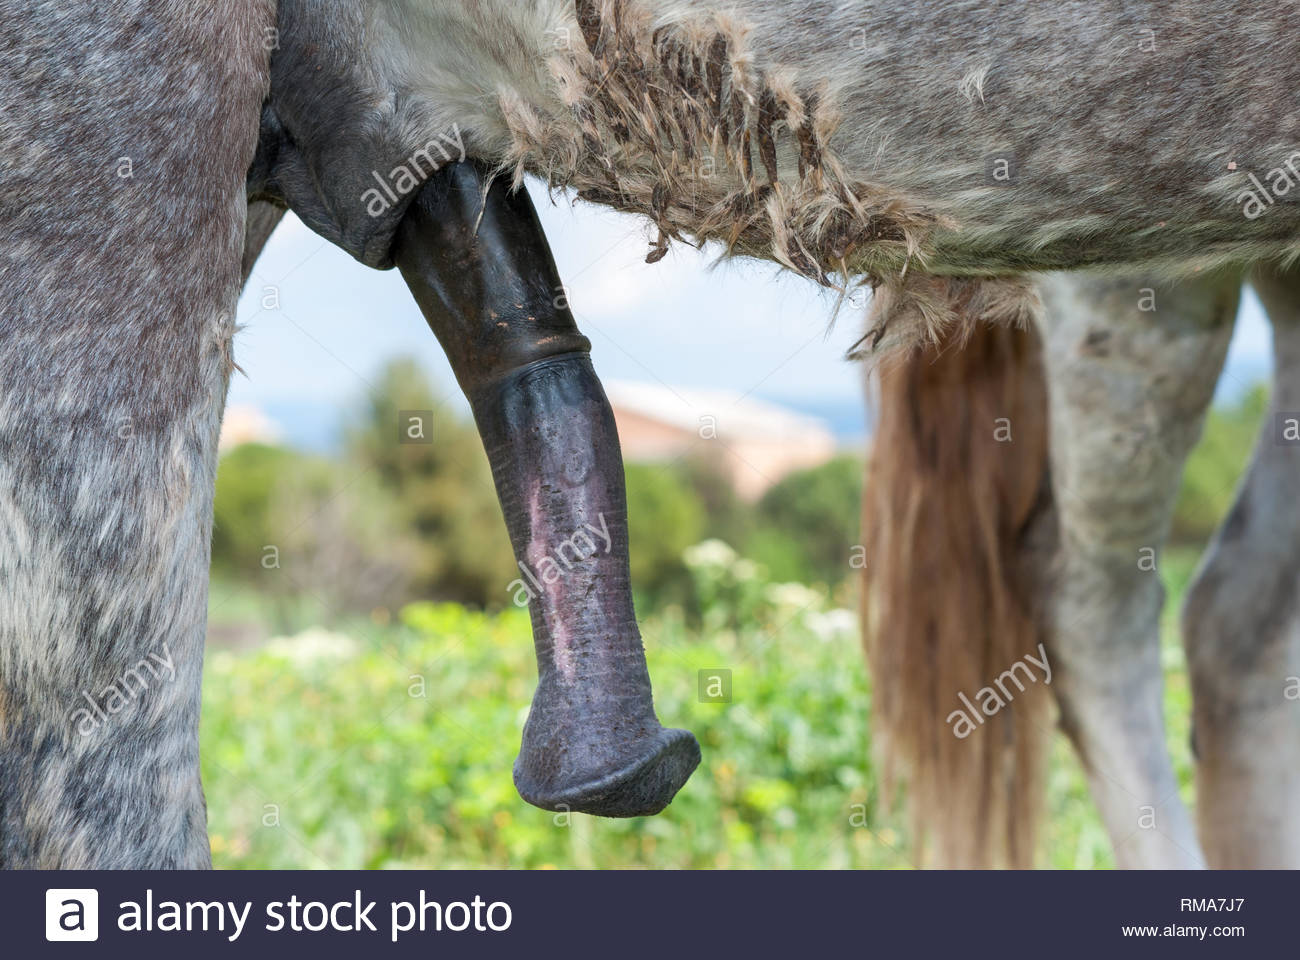 Picture of a horse's penis